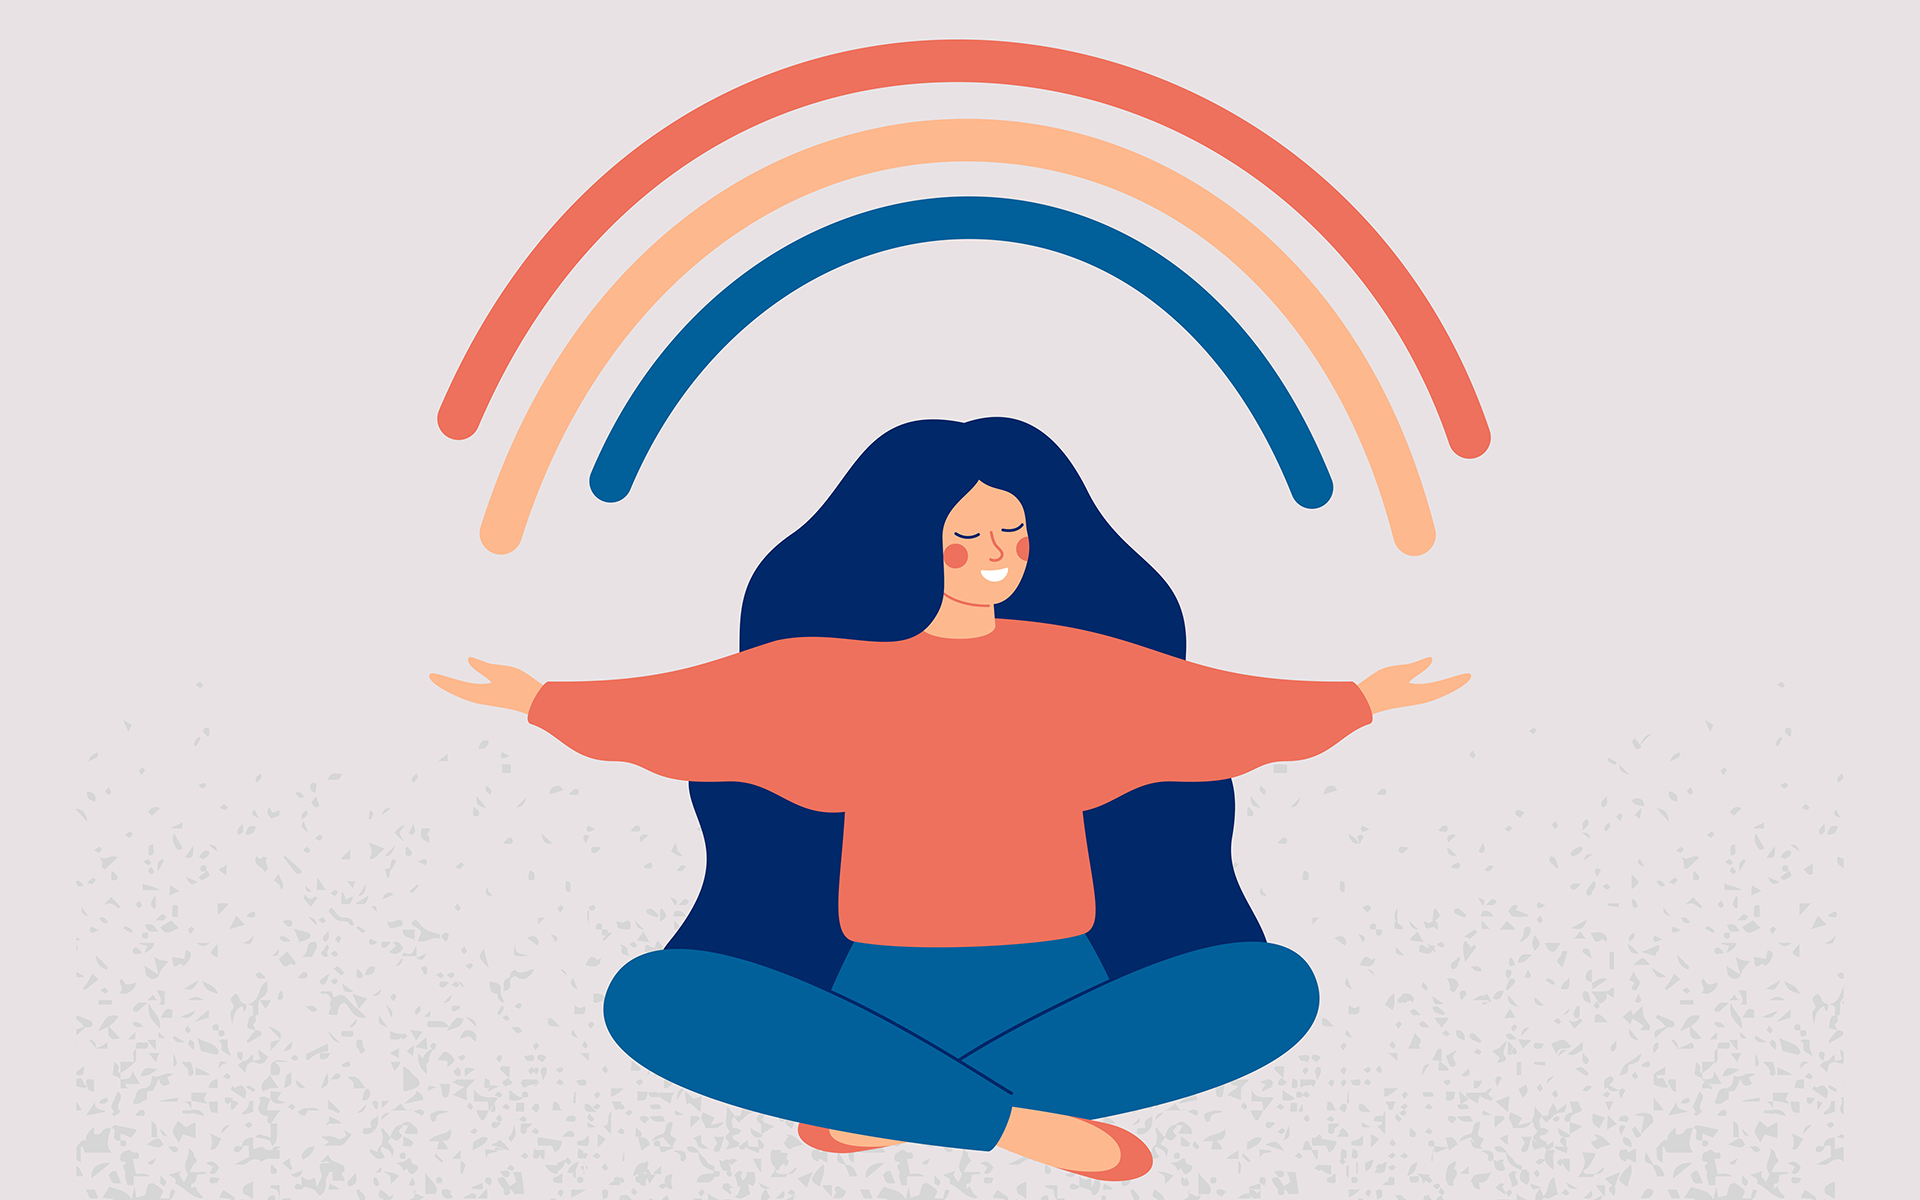 Illustration of a woman sitting cross-legged with her arms outstretched with a rainbow above her.